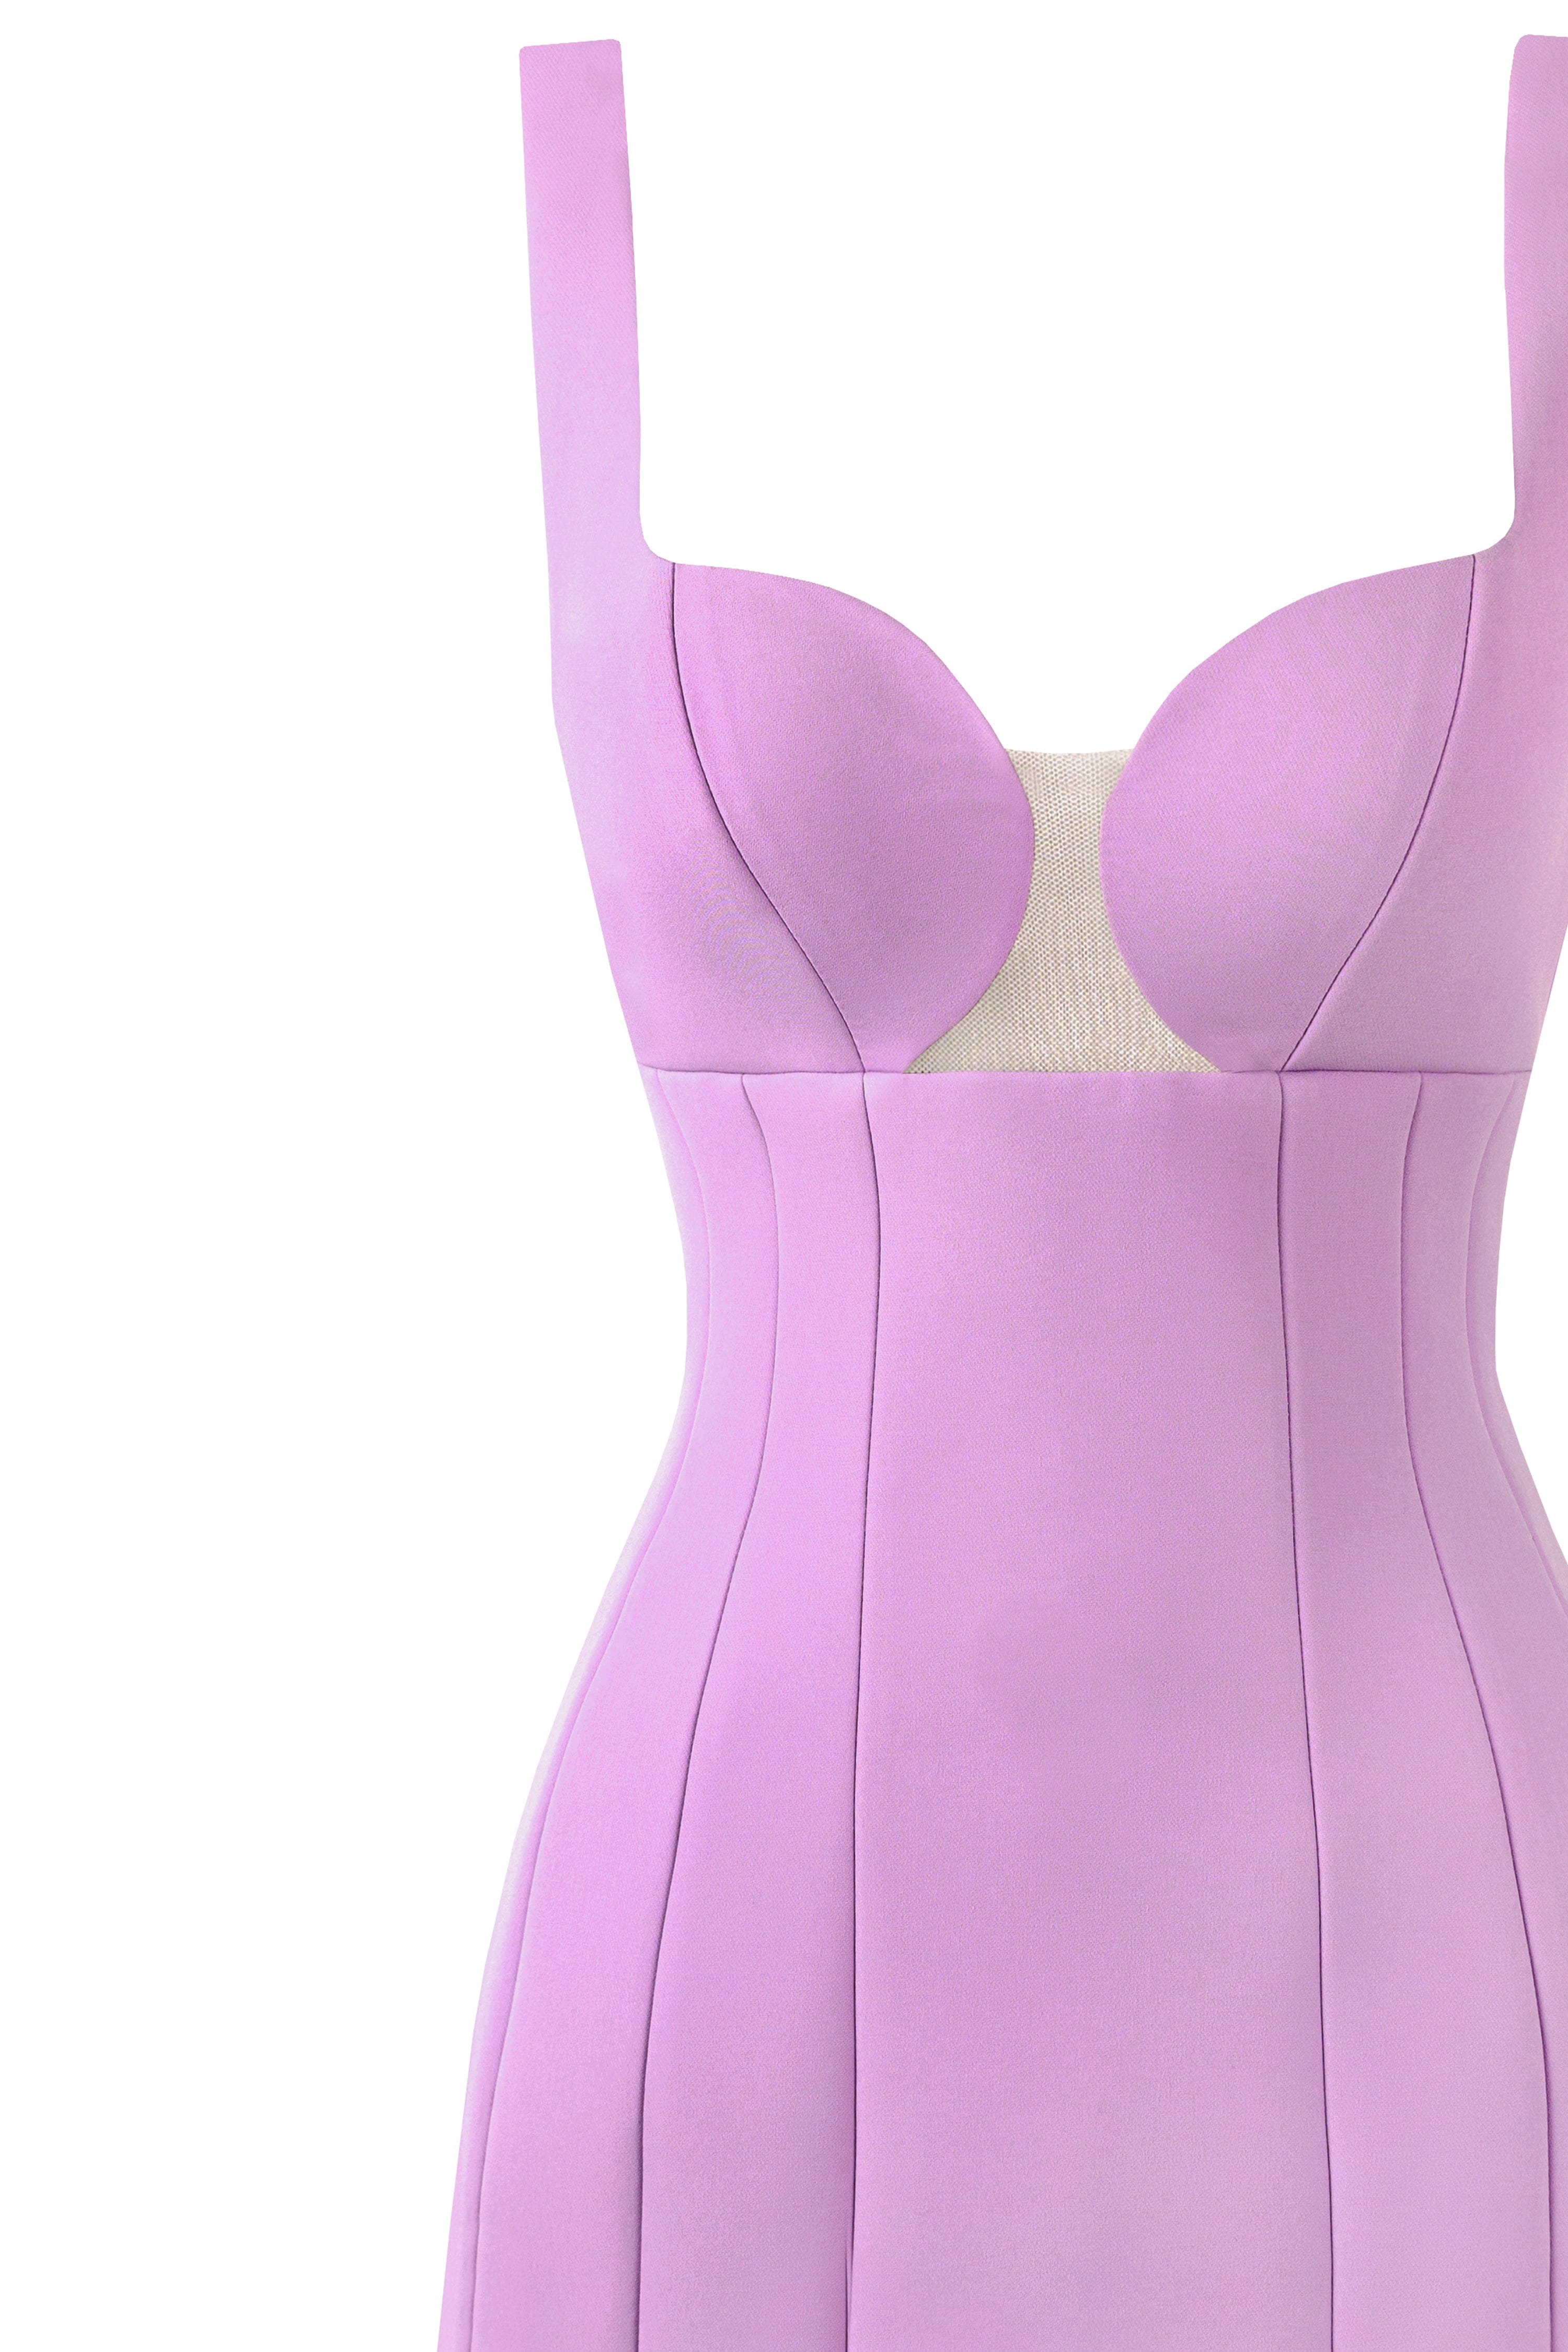 Glossy ultra mini dress in lavender with cutouts